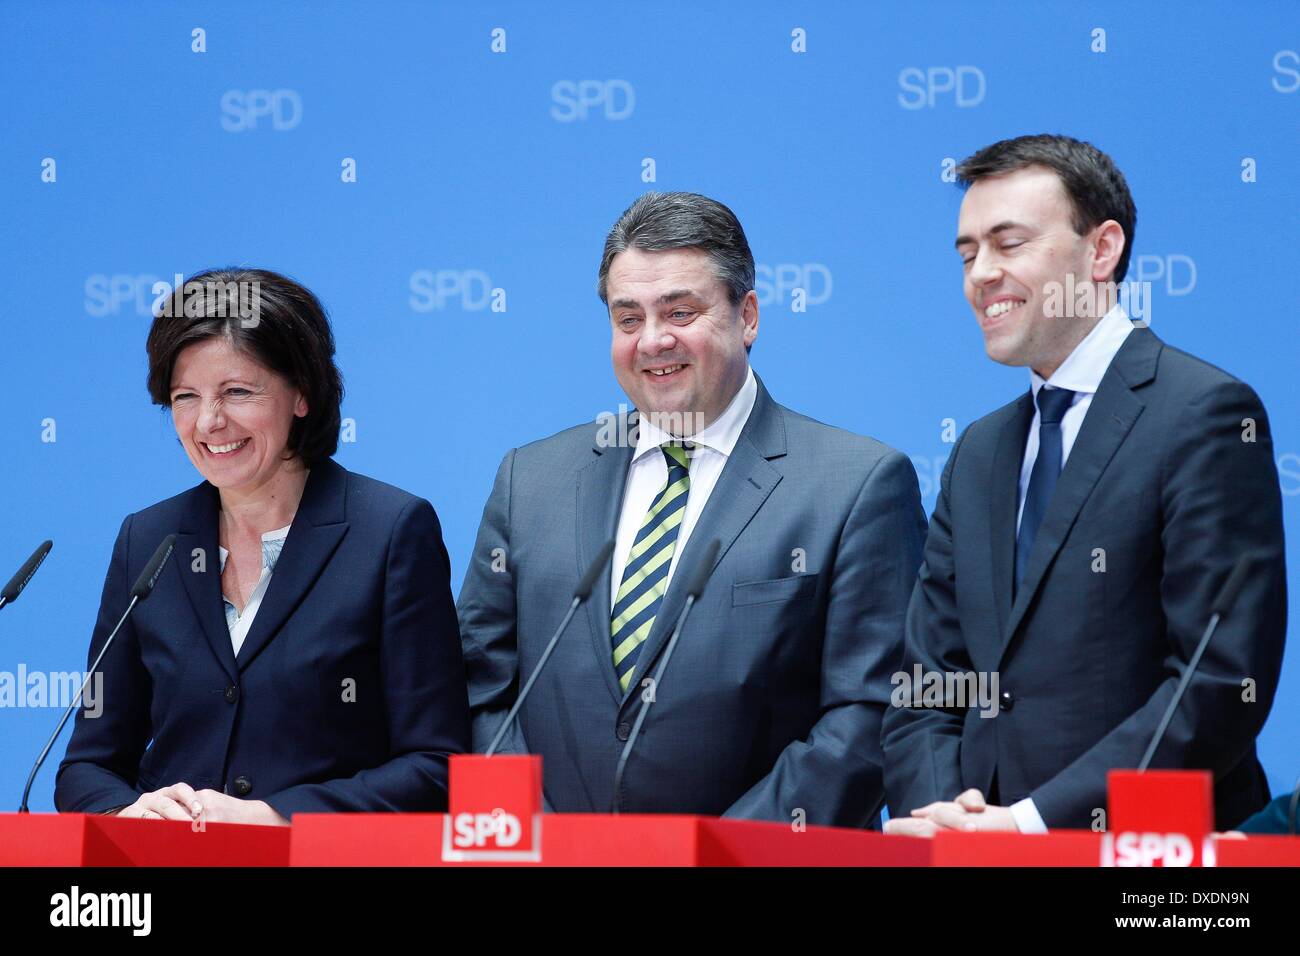 Berlin, Germany. 24th Mar, 2014. Statement on energy policy with Sigmar Gabriel, SPD Chief and Miniter of Economy, and Hannelore Kraft, Minister-President of North Rhine-Westphalia, and Malu Dreyer, Minister-President of Rhineland-Palatinate, and the Deputy Prime Minister of Baden-WÃƒÆ’Ã‚Â¼rttemberg Nils Schmid at Willy-Brandt-Haus in Berlin./Picture: Sigmar Gabriel, SPD Chief and Miniter of Economy, and Hannelore Kraft, Minister-President of North Rhine-Westphalia, and Malu Dreyer, Minister-President of Rhineland-Palatinate, and the Deputy Prime Minister of Baden-WÃƒÆ’Ã‚Â¼rttemberg Nils S Stock Photo